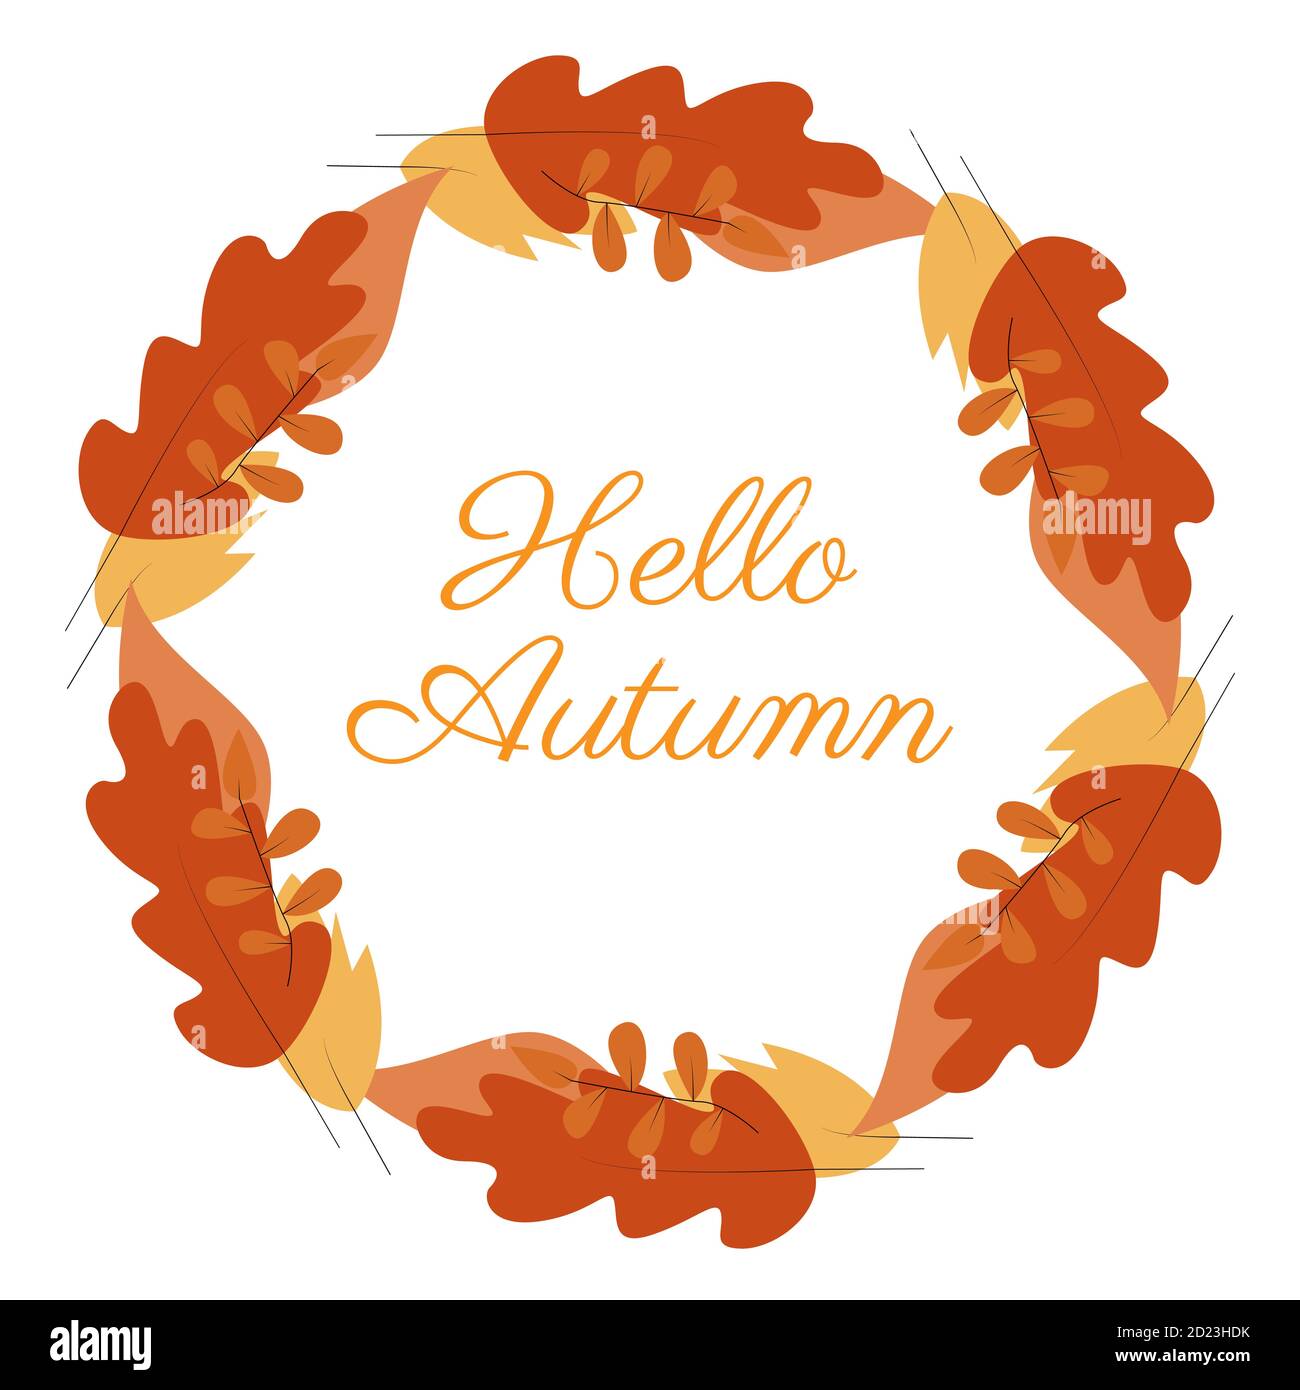 Illustration vector design of fall leaves of autumn background template Stock Vector